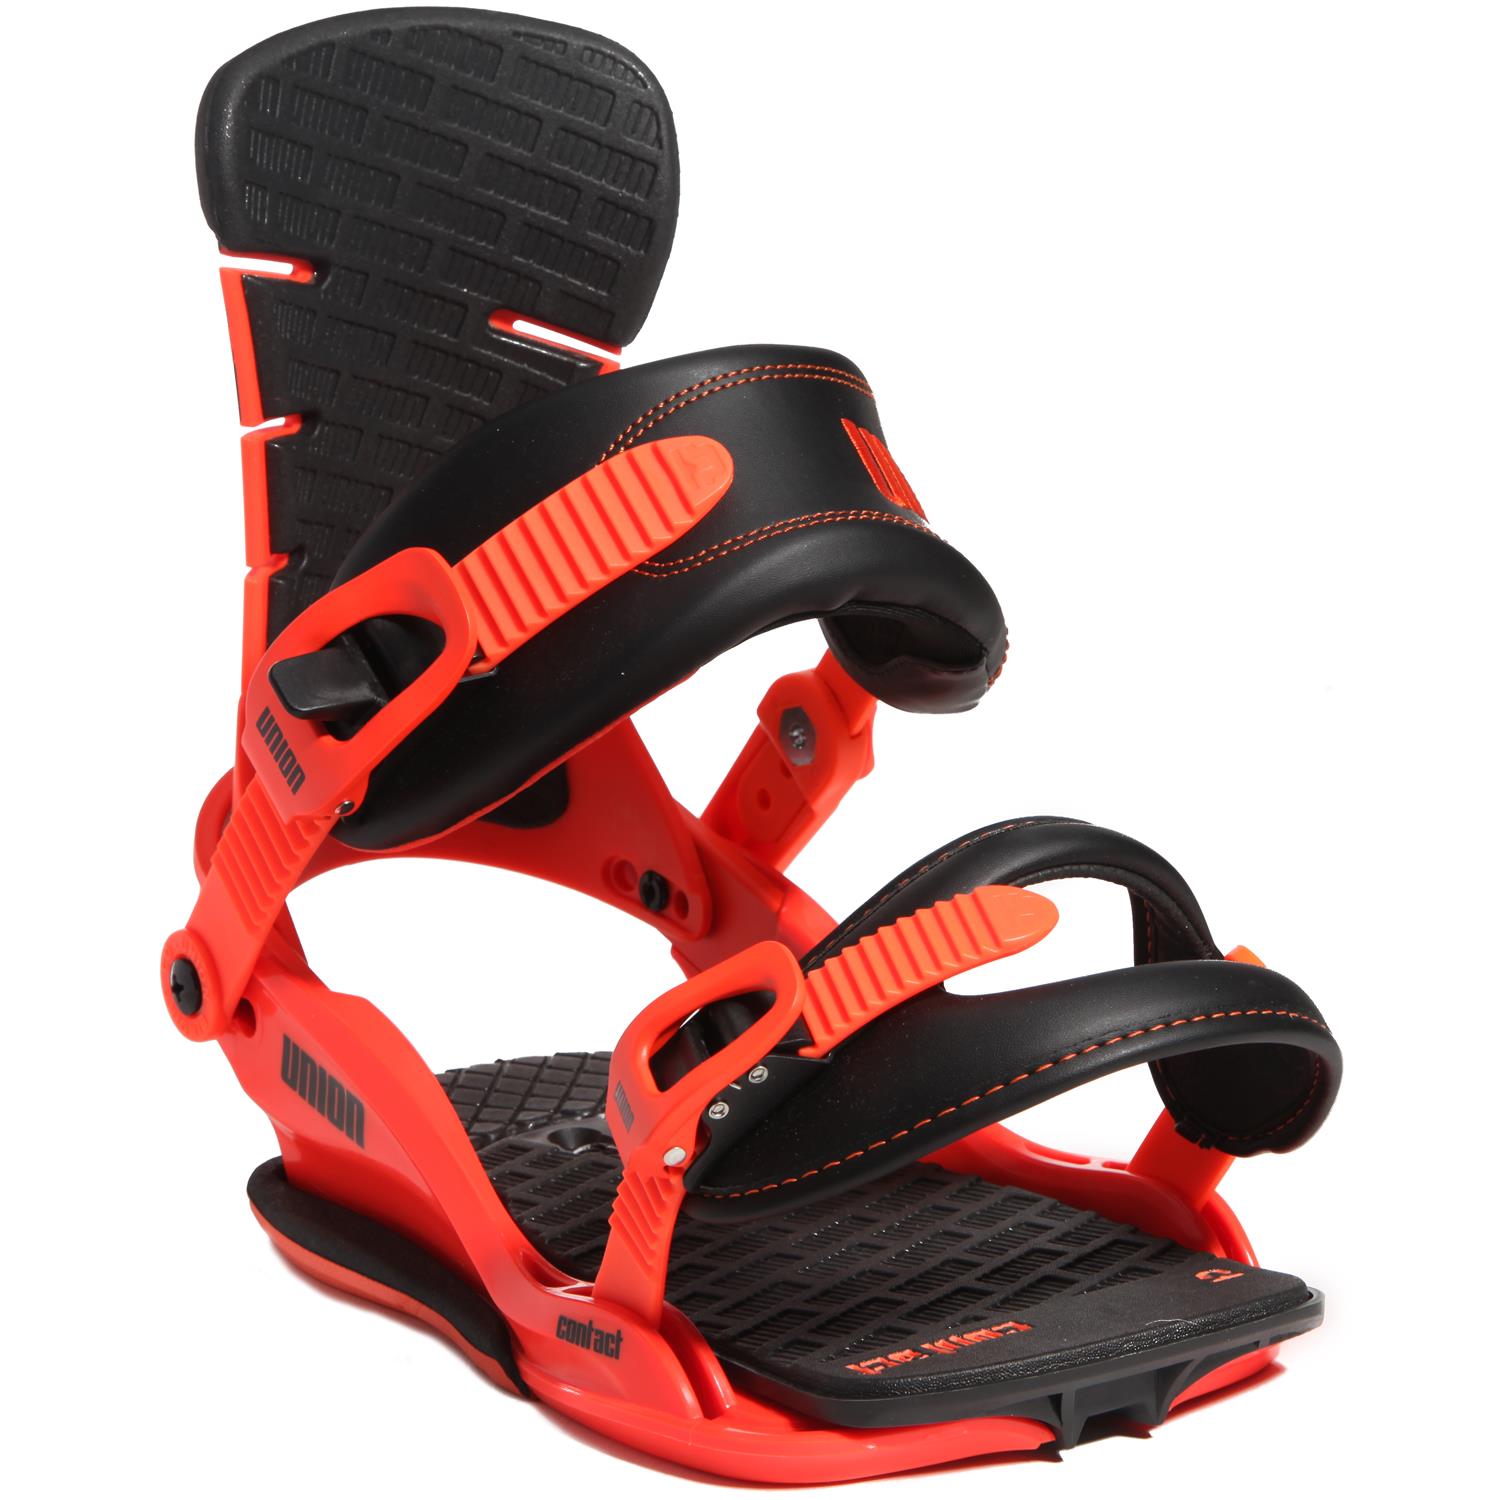 Union Contact Snowboard Bindings - New Demo 2013 | evo outlet